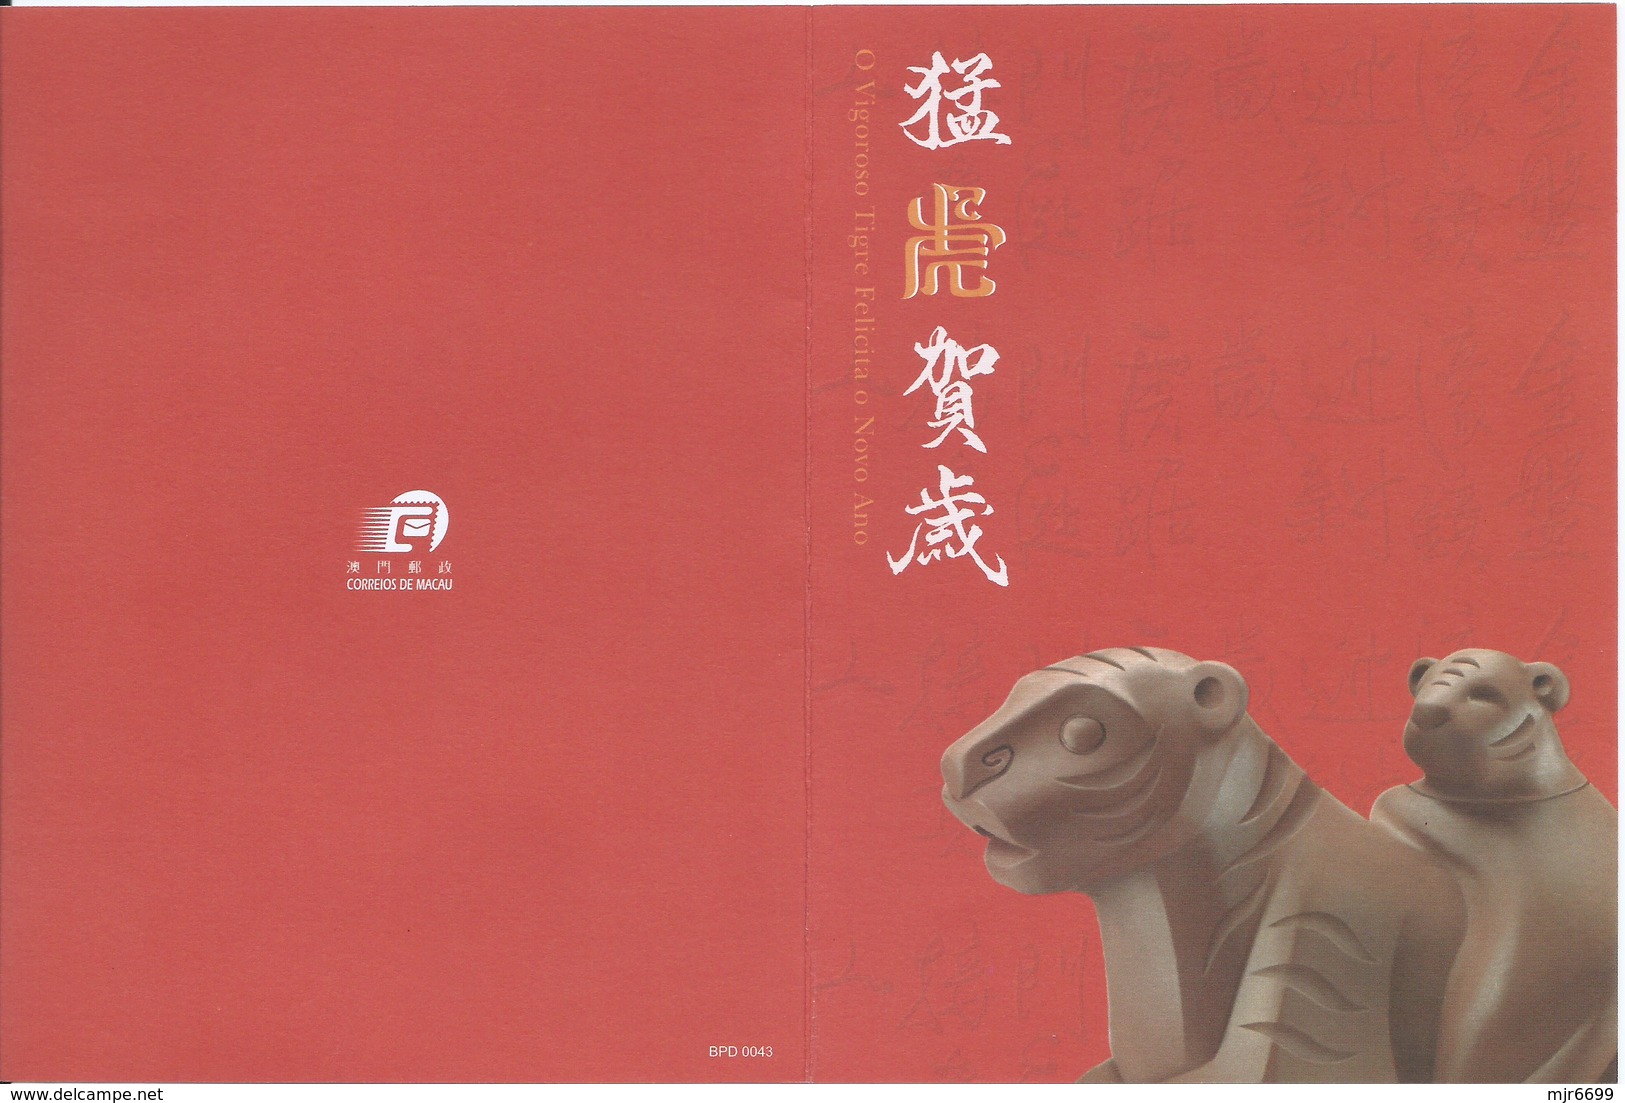 MACAU 2010 LUNAR YEAR OF THE TIGER GREETING CARD & POSTAGE PAID COVER FIRST DAY USAGE - Entiers Postaux